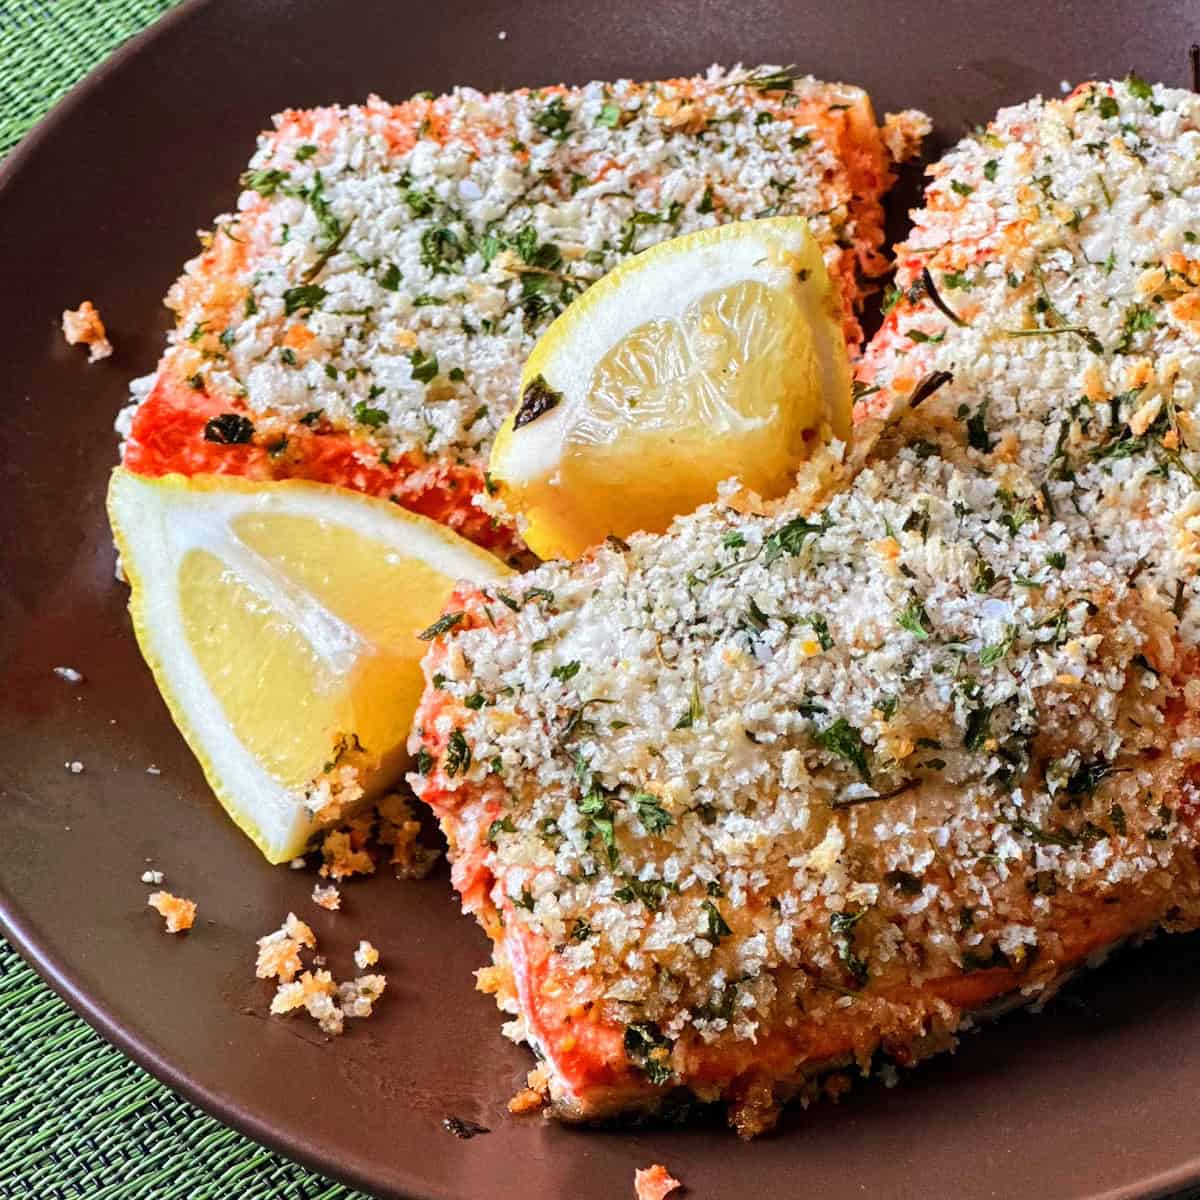 fillets of salmon with panko crust and lemon wedges on brown plate on green placemat